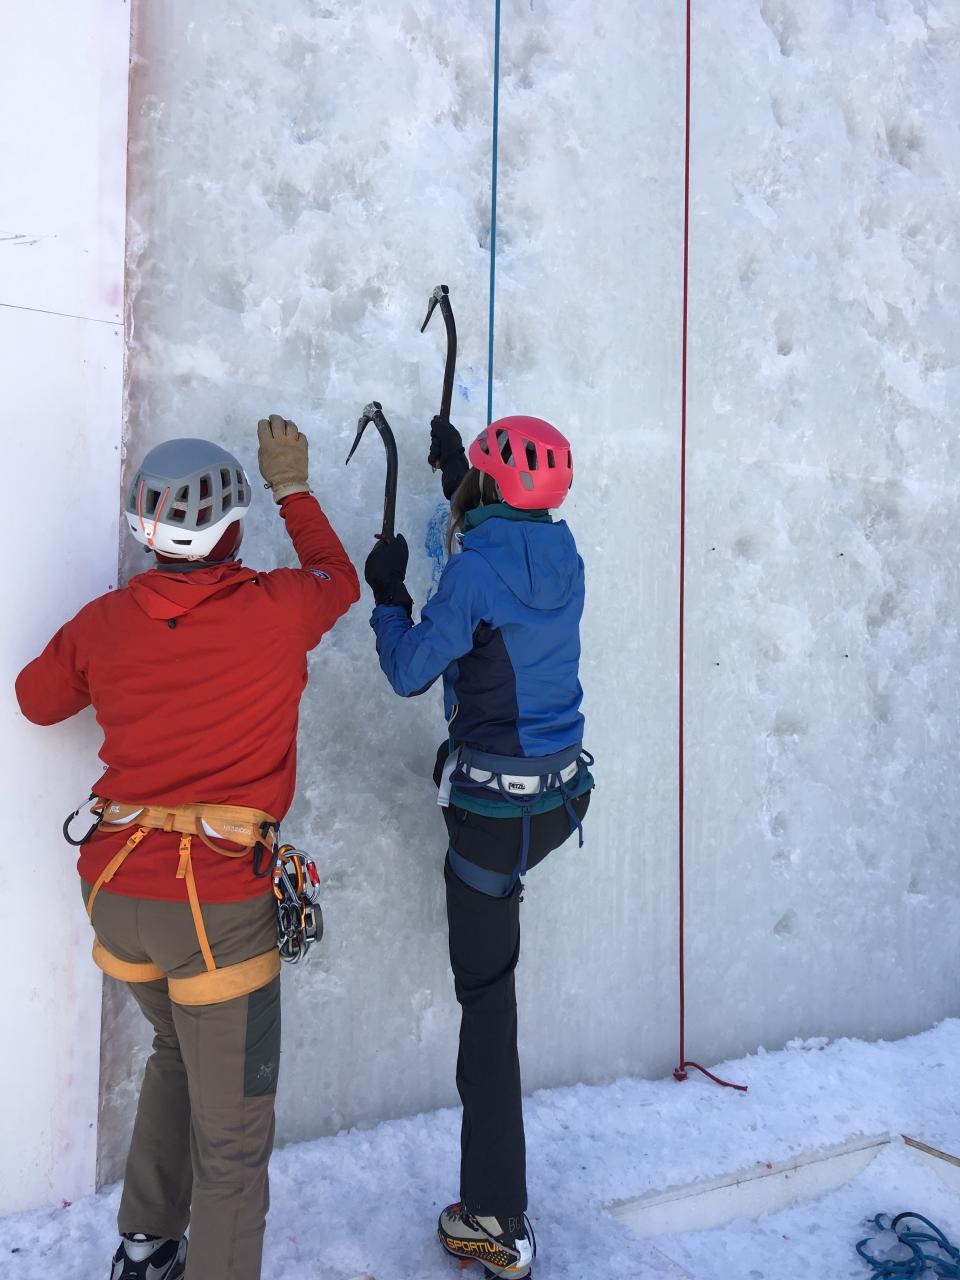 Before I tried scaling the ice, I practiced the basic arm and leg movements at the base of the wall.